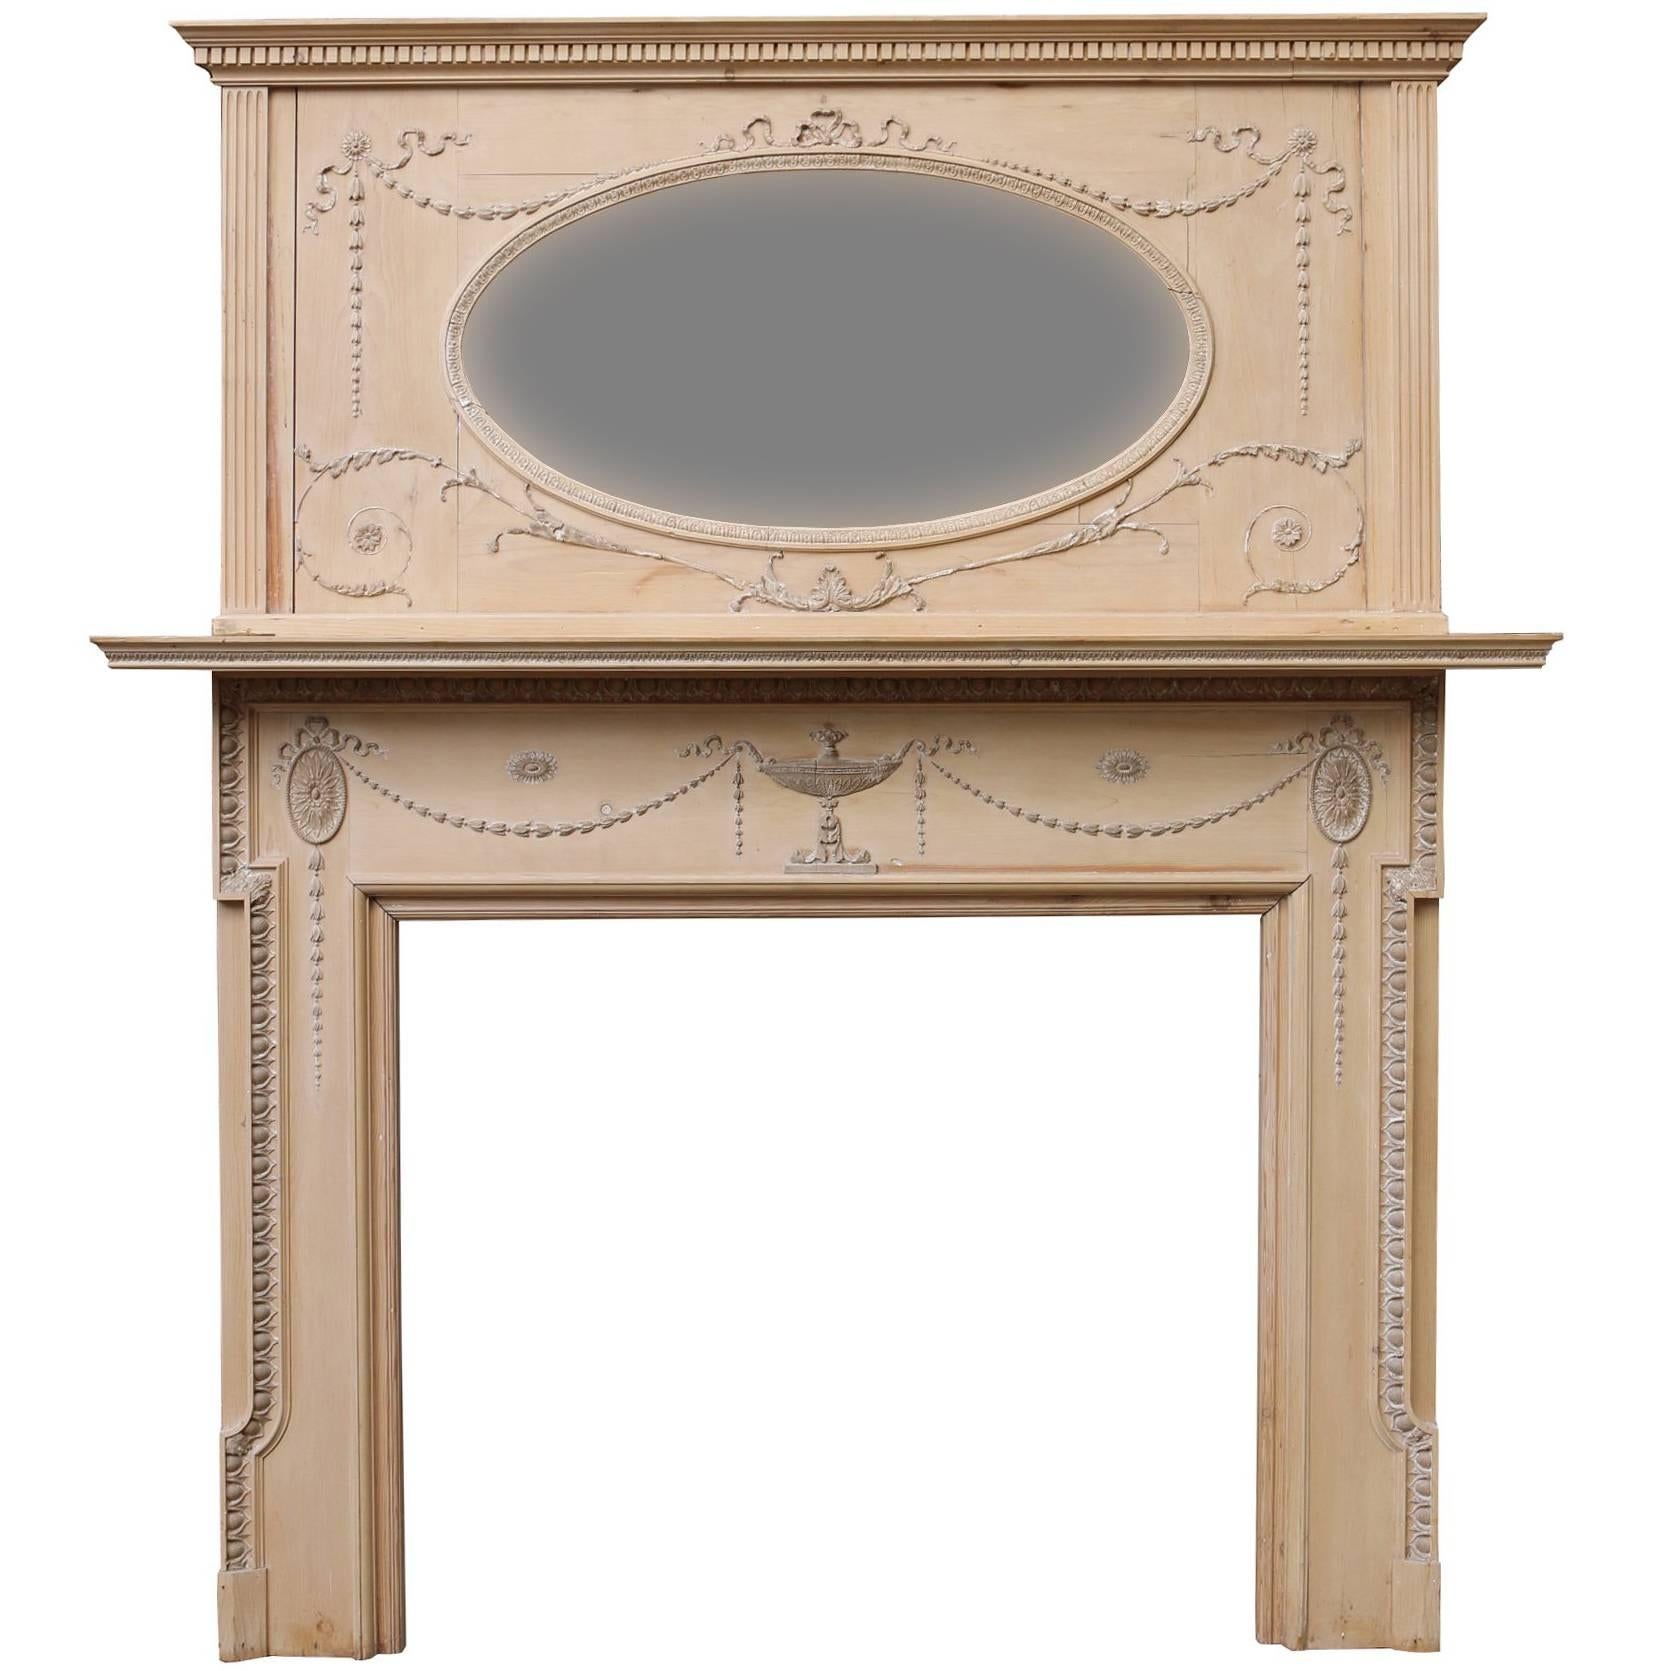 Edwardian Pine and Composition Fire Surround with Mirrored over Mantel